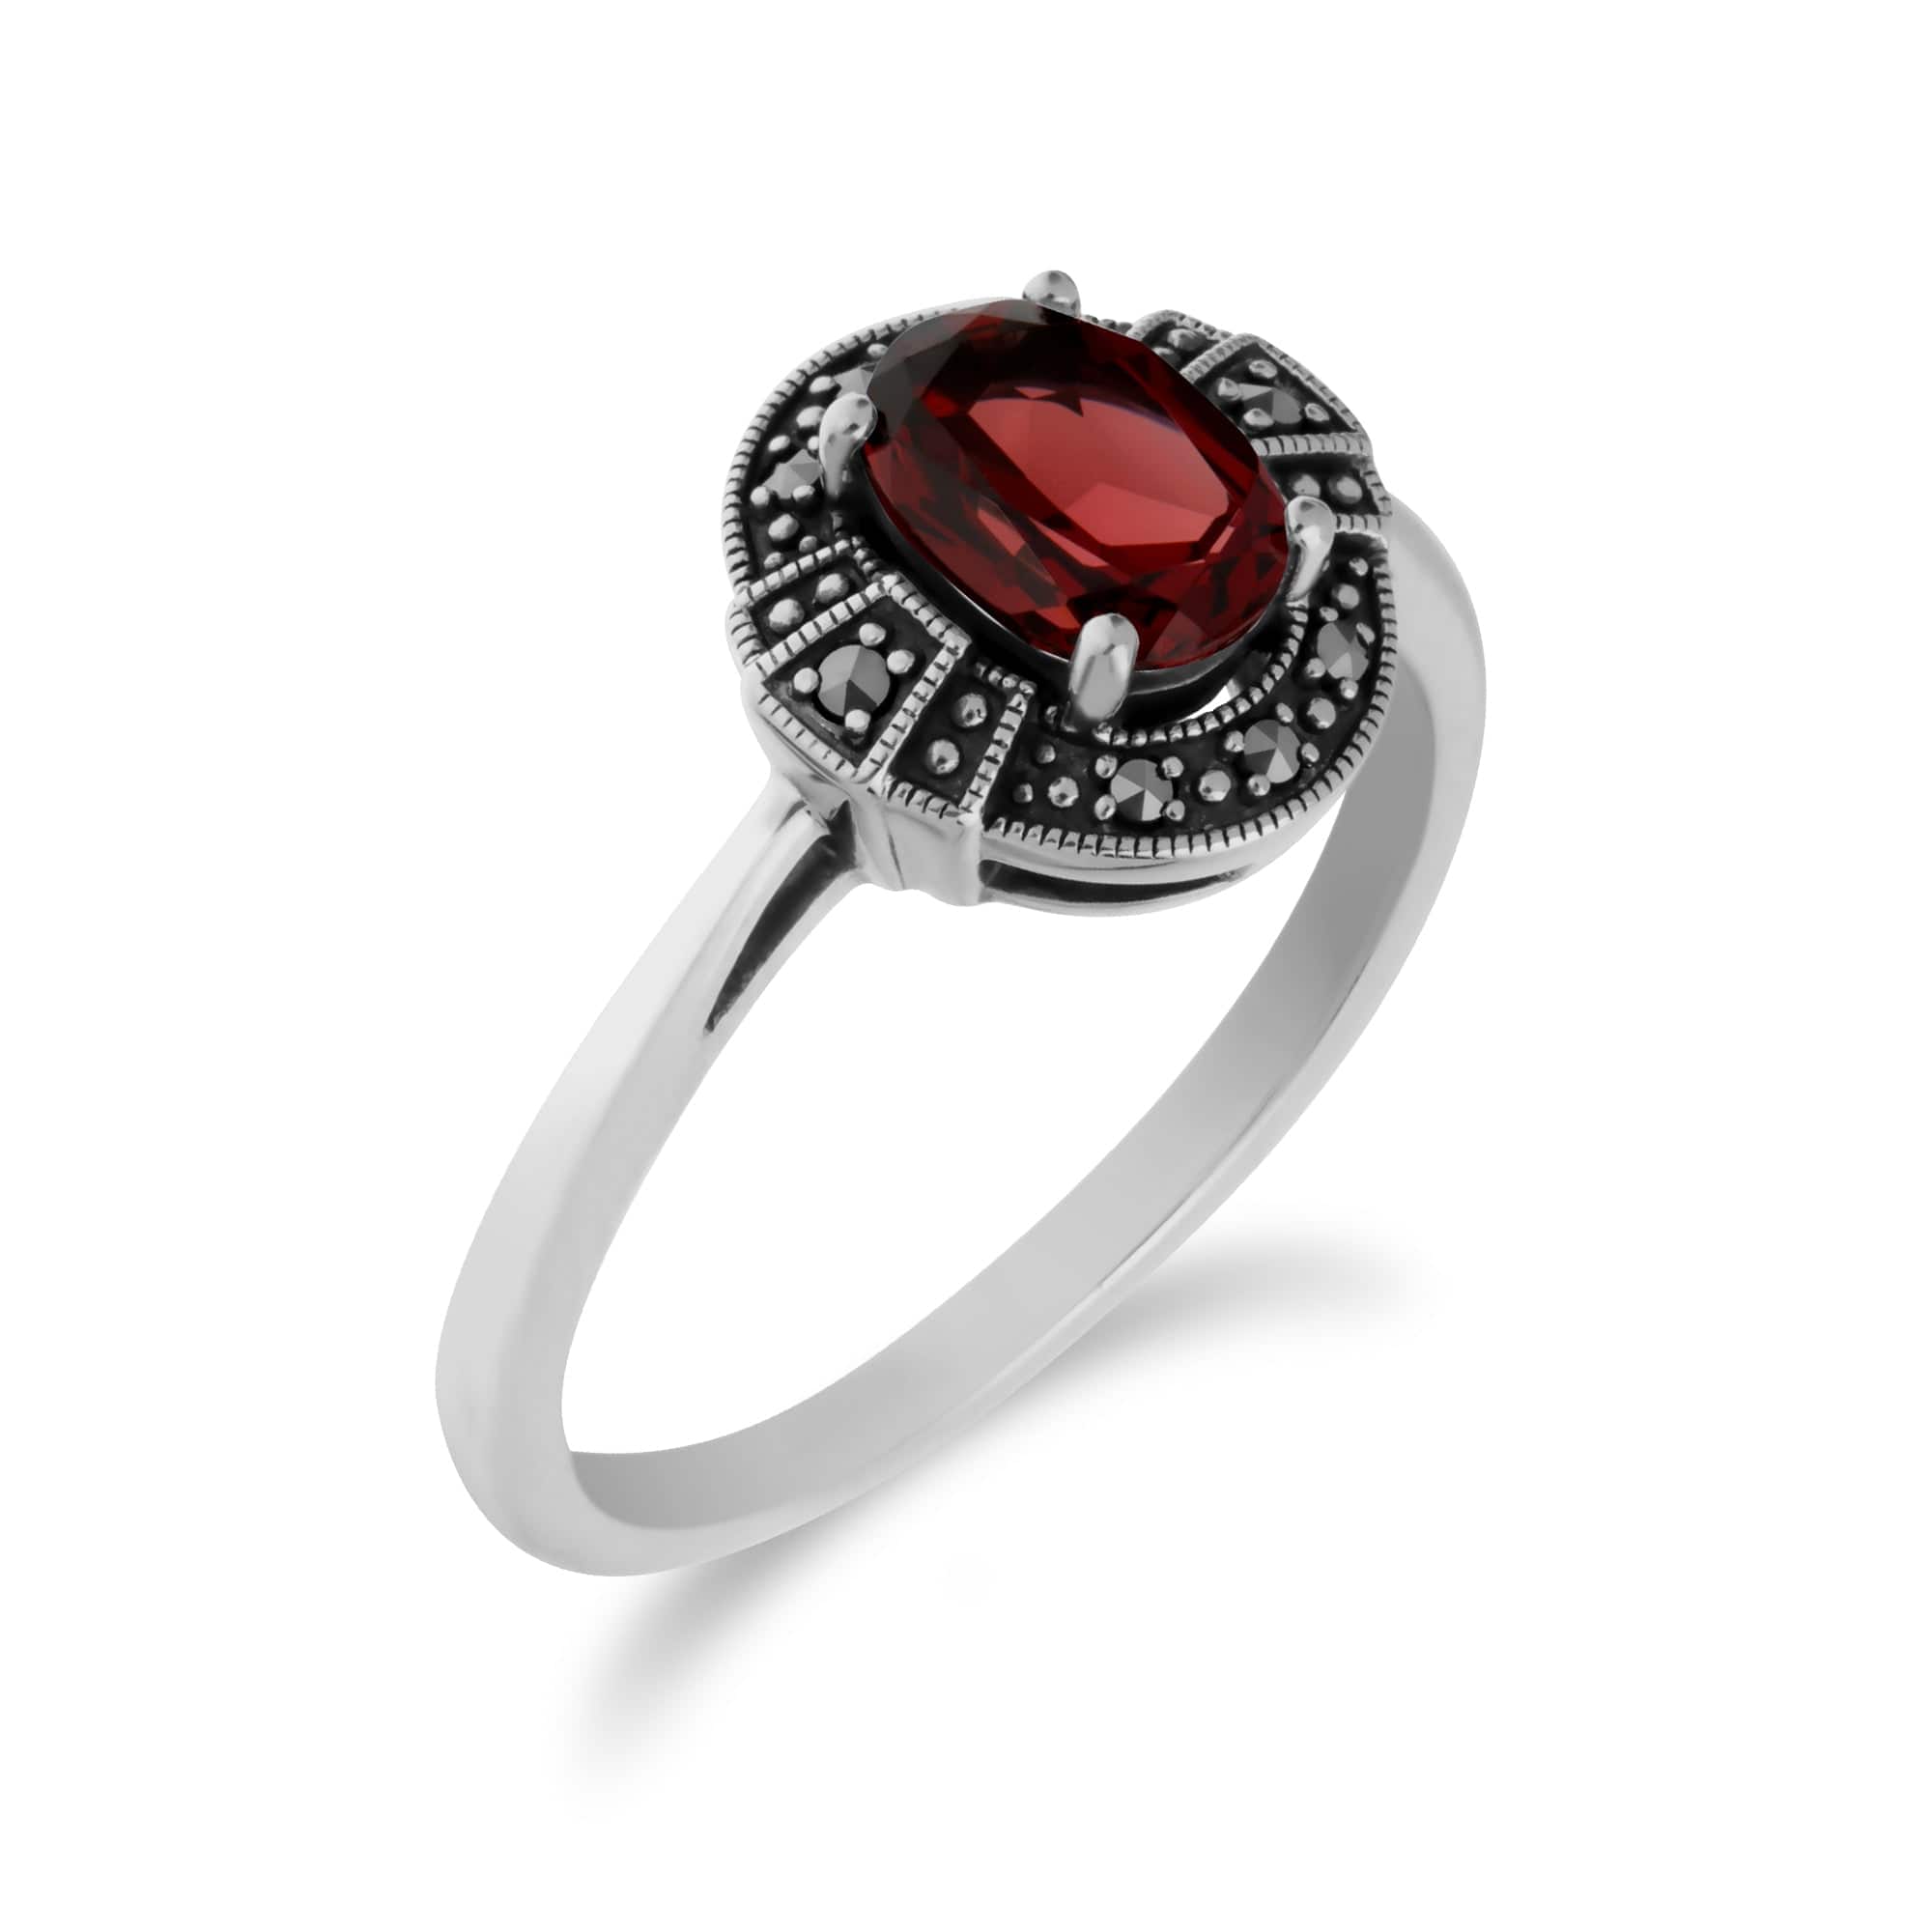 214R605703925 Art Deco Style Oval Garnet & Marcasite Halo Ring in 925 Sterling Silver 2